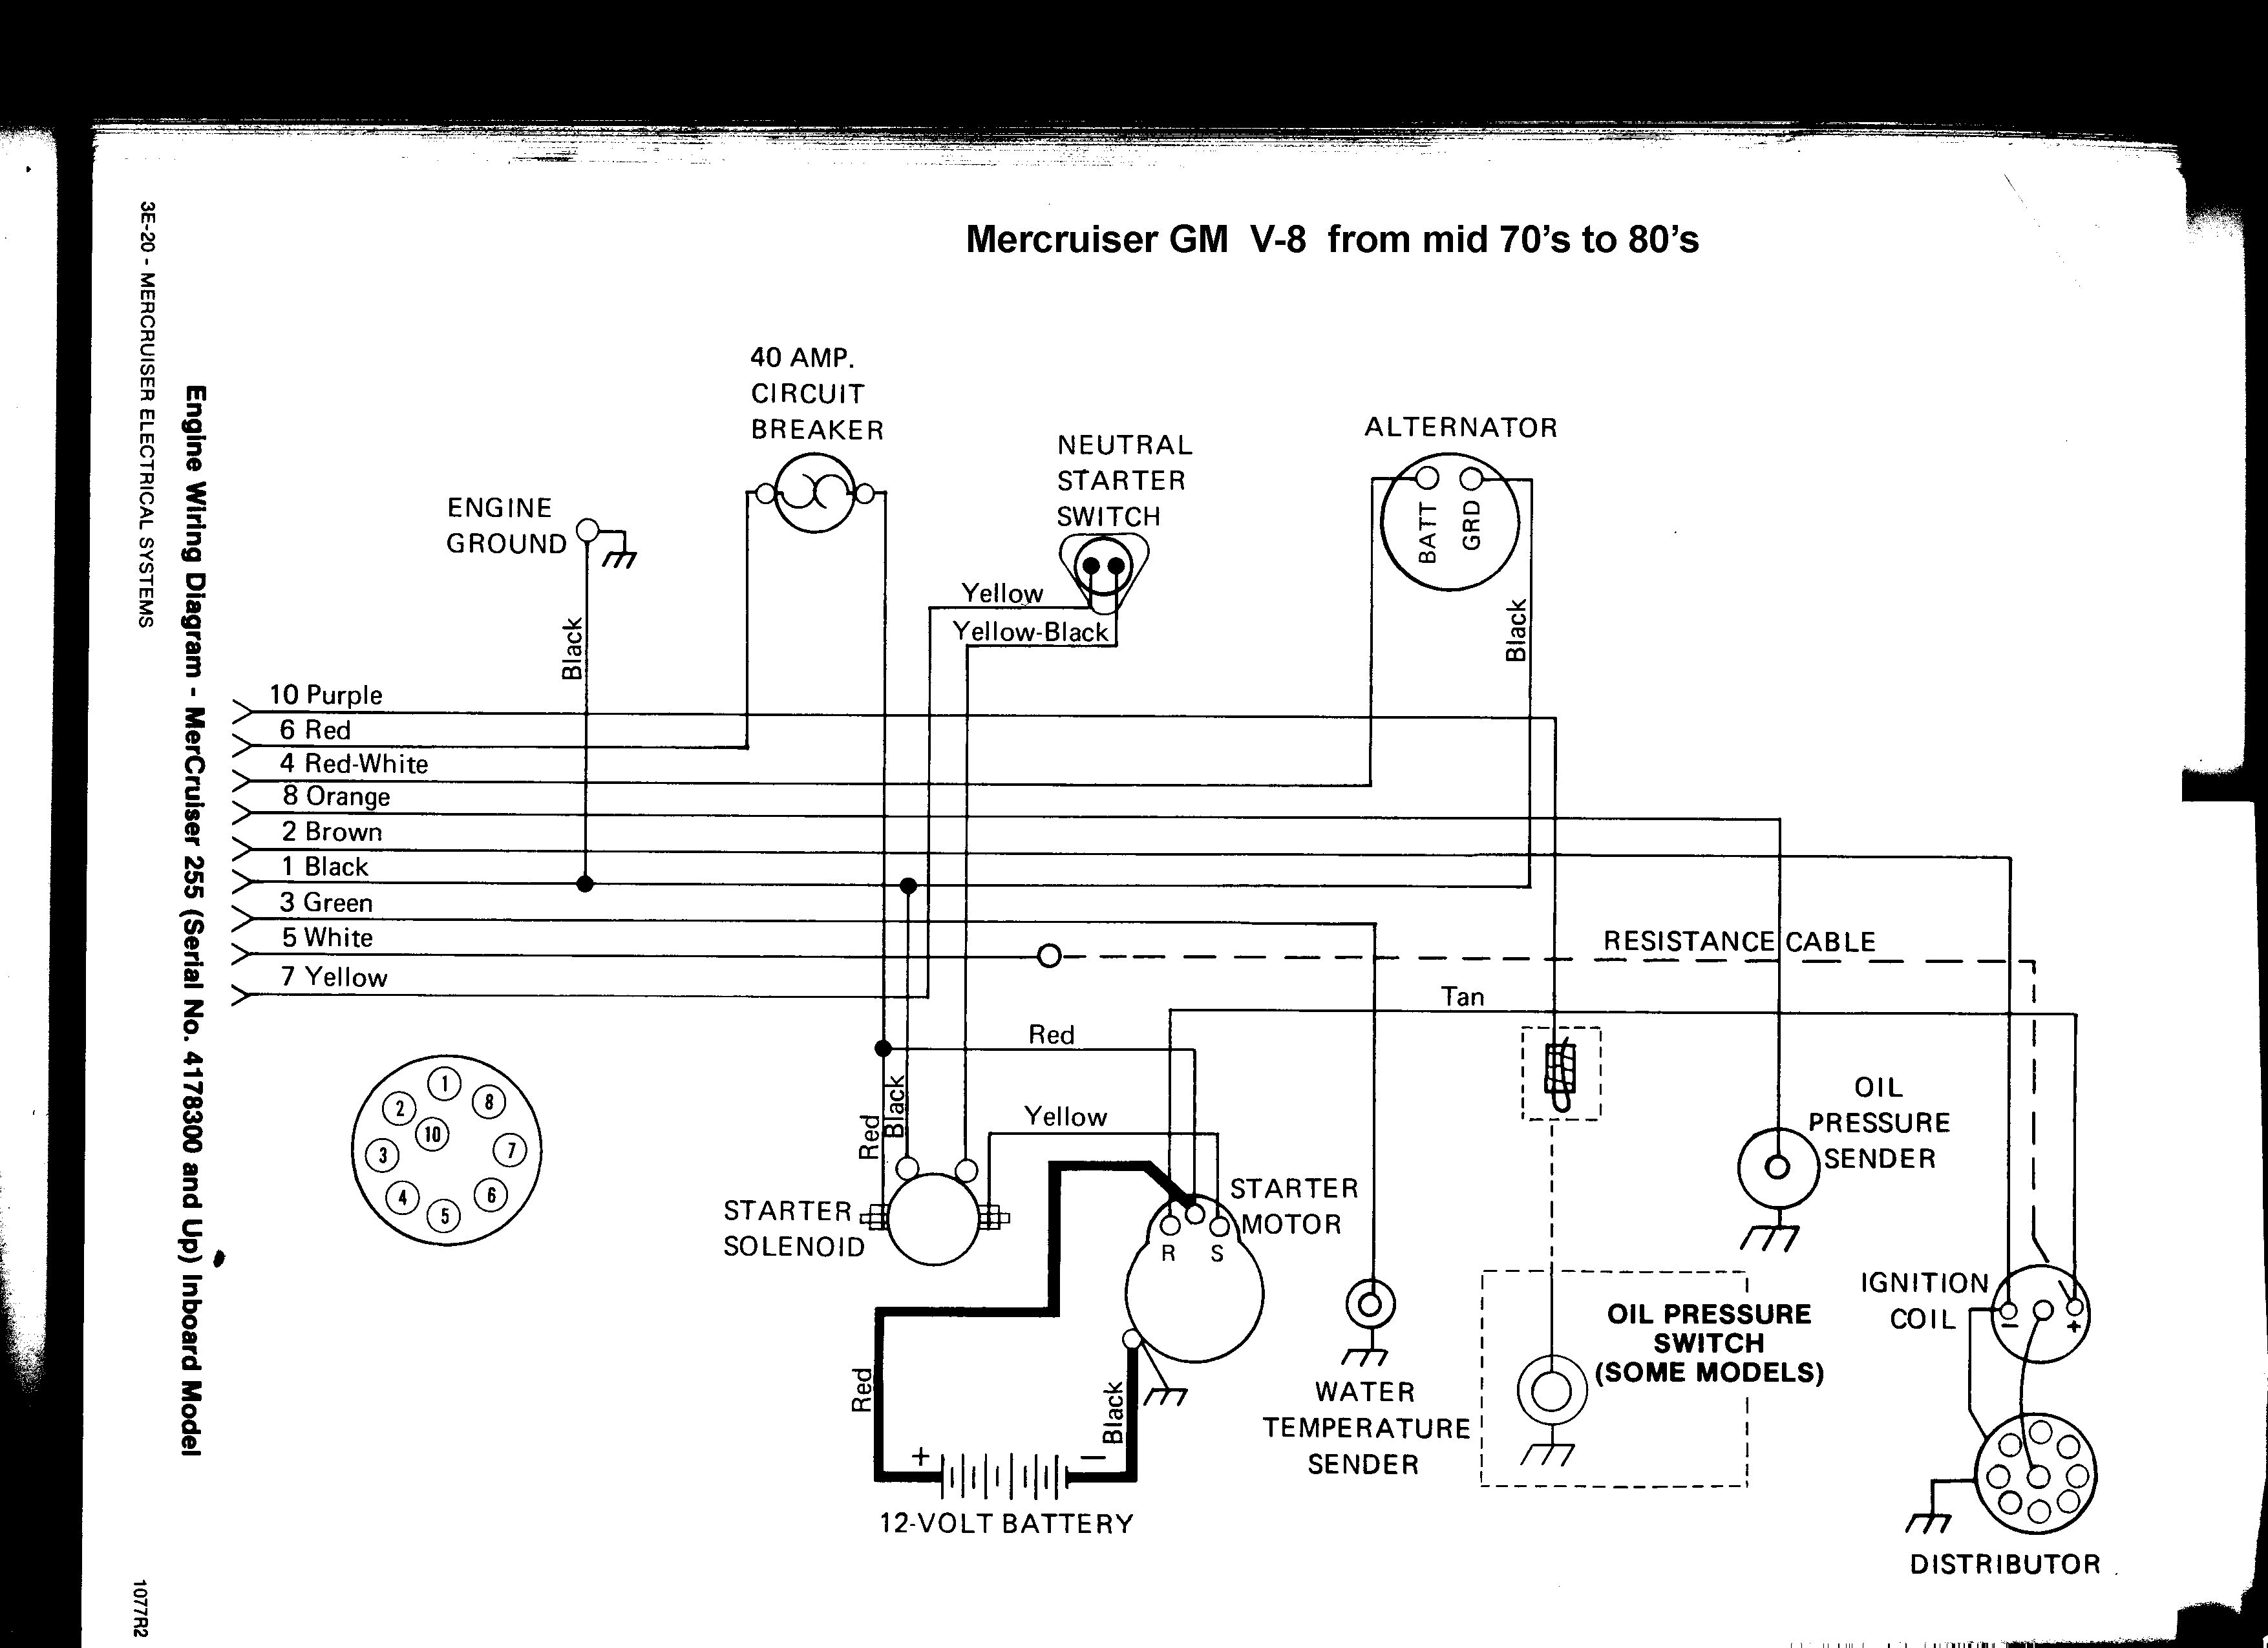 Tilt and Trim Switch Wiring Diagram Lovely Mercruiser Electrical Diagrams Wiring Diagrams